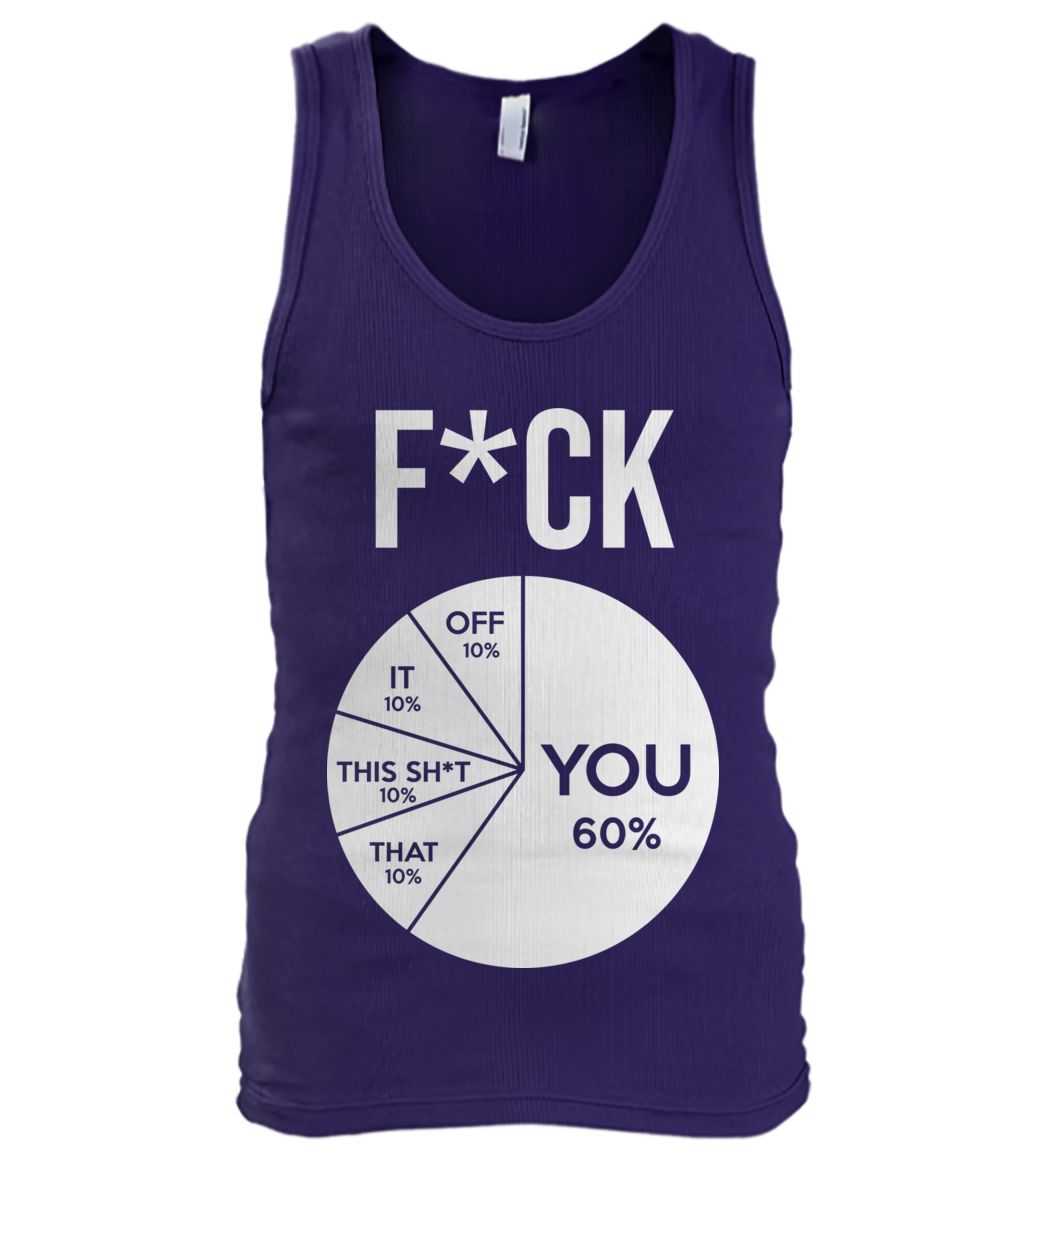 Fuck pie chart you 60% off 10% it 10% this shit 10% that 10% men's tank top